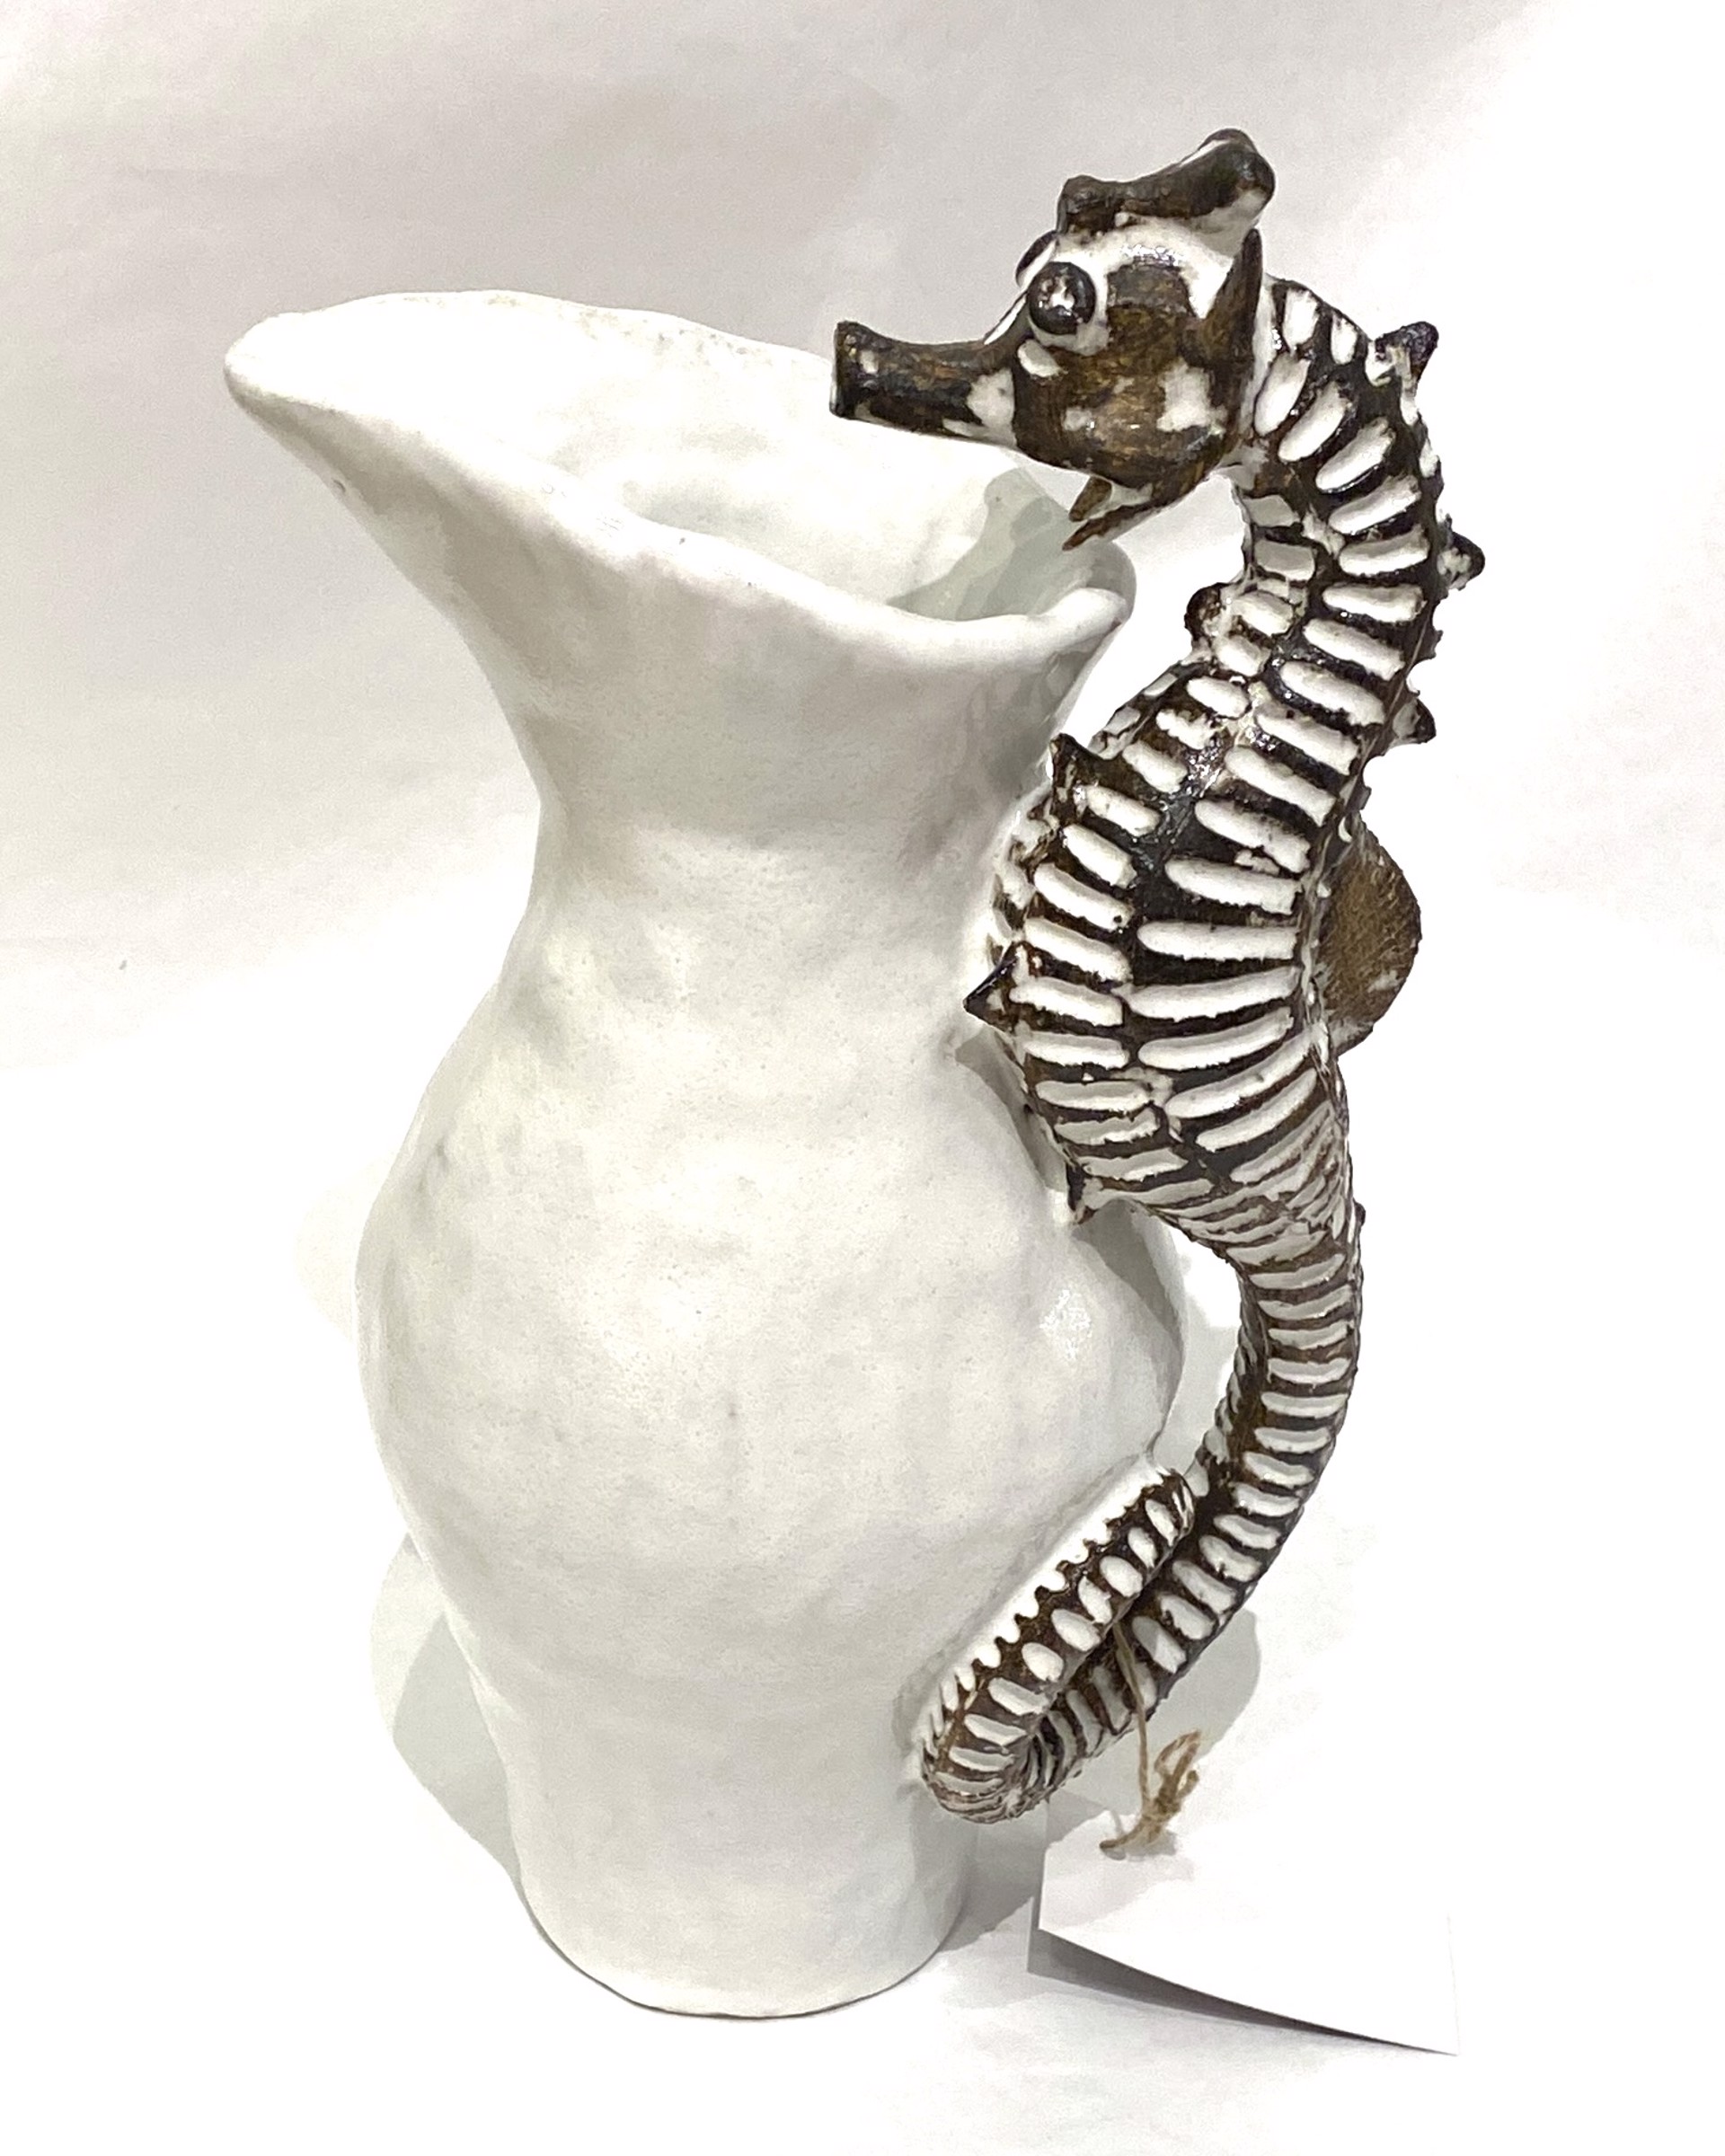 Seahorse Pitcher by Shayne Greco